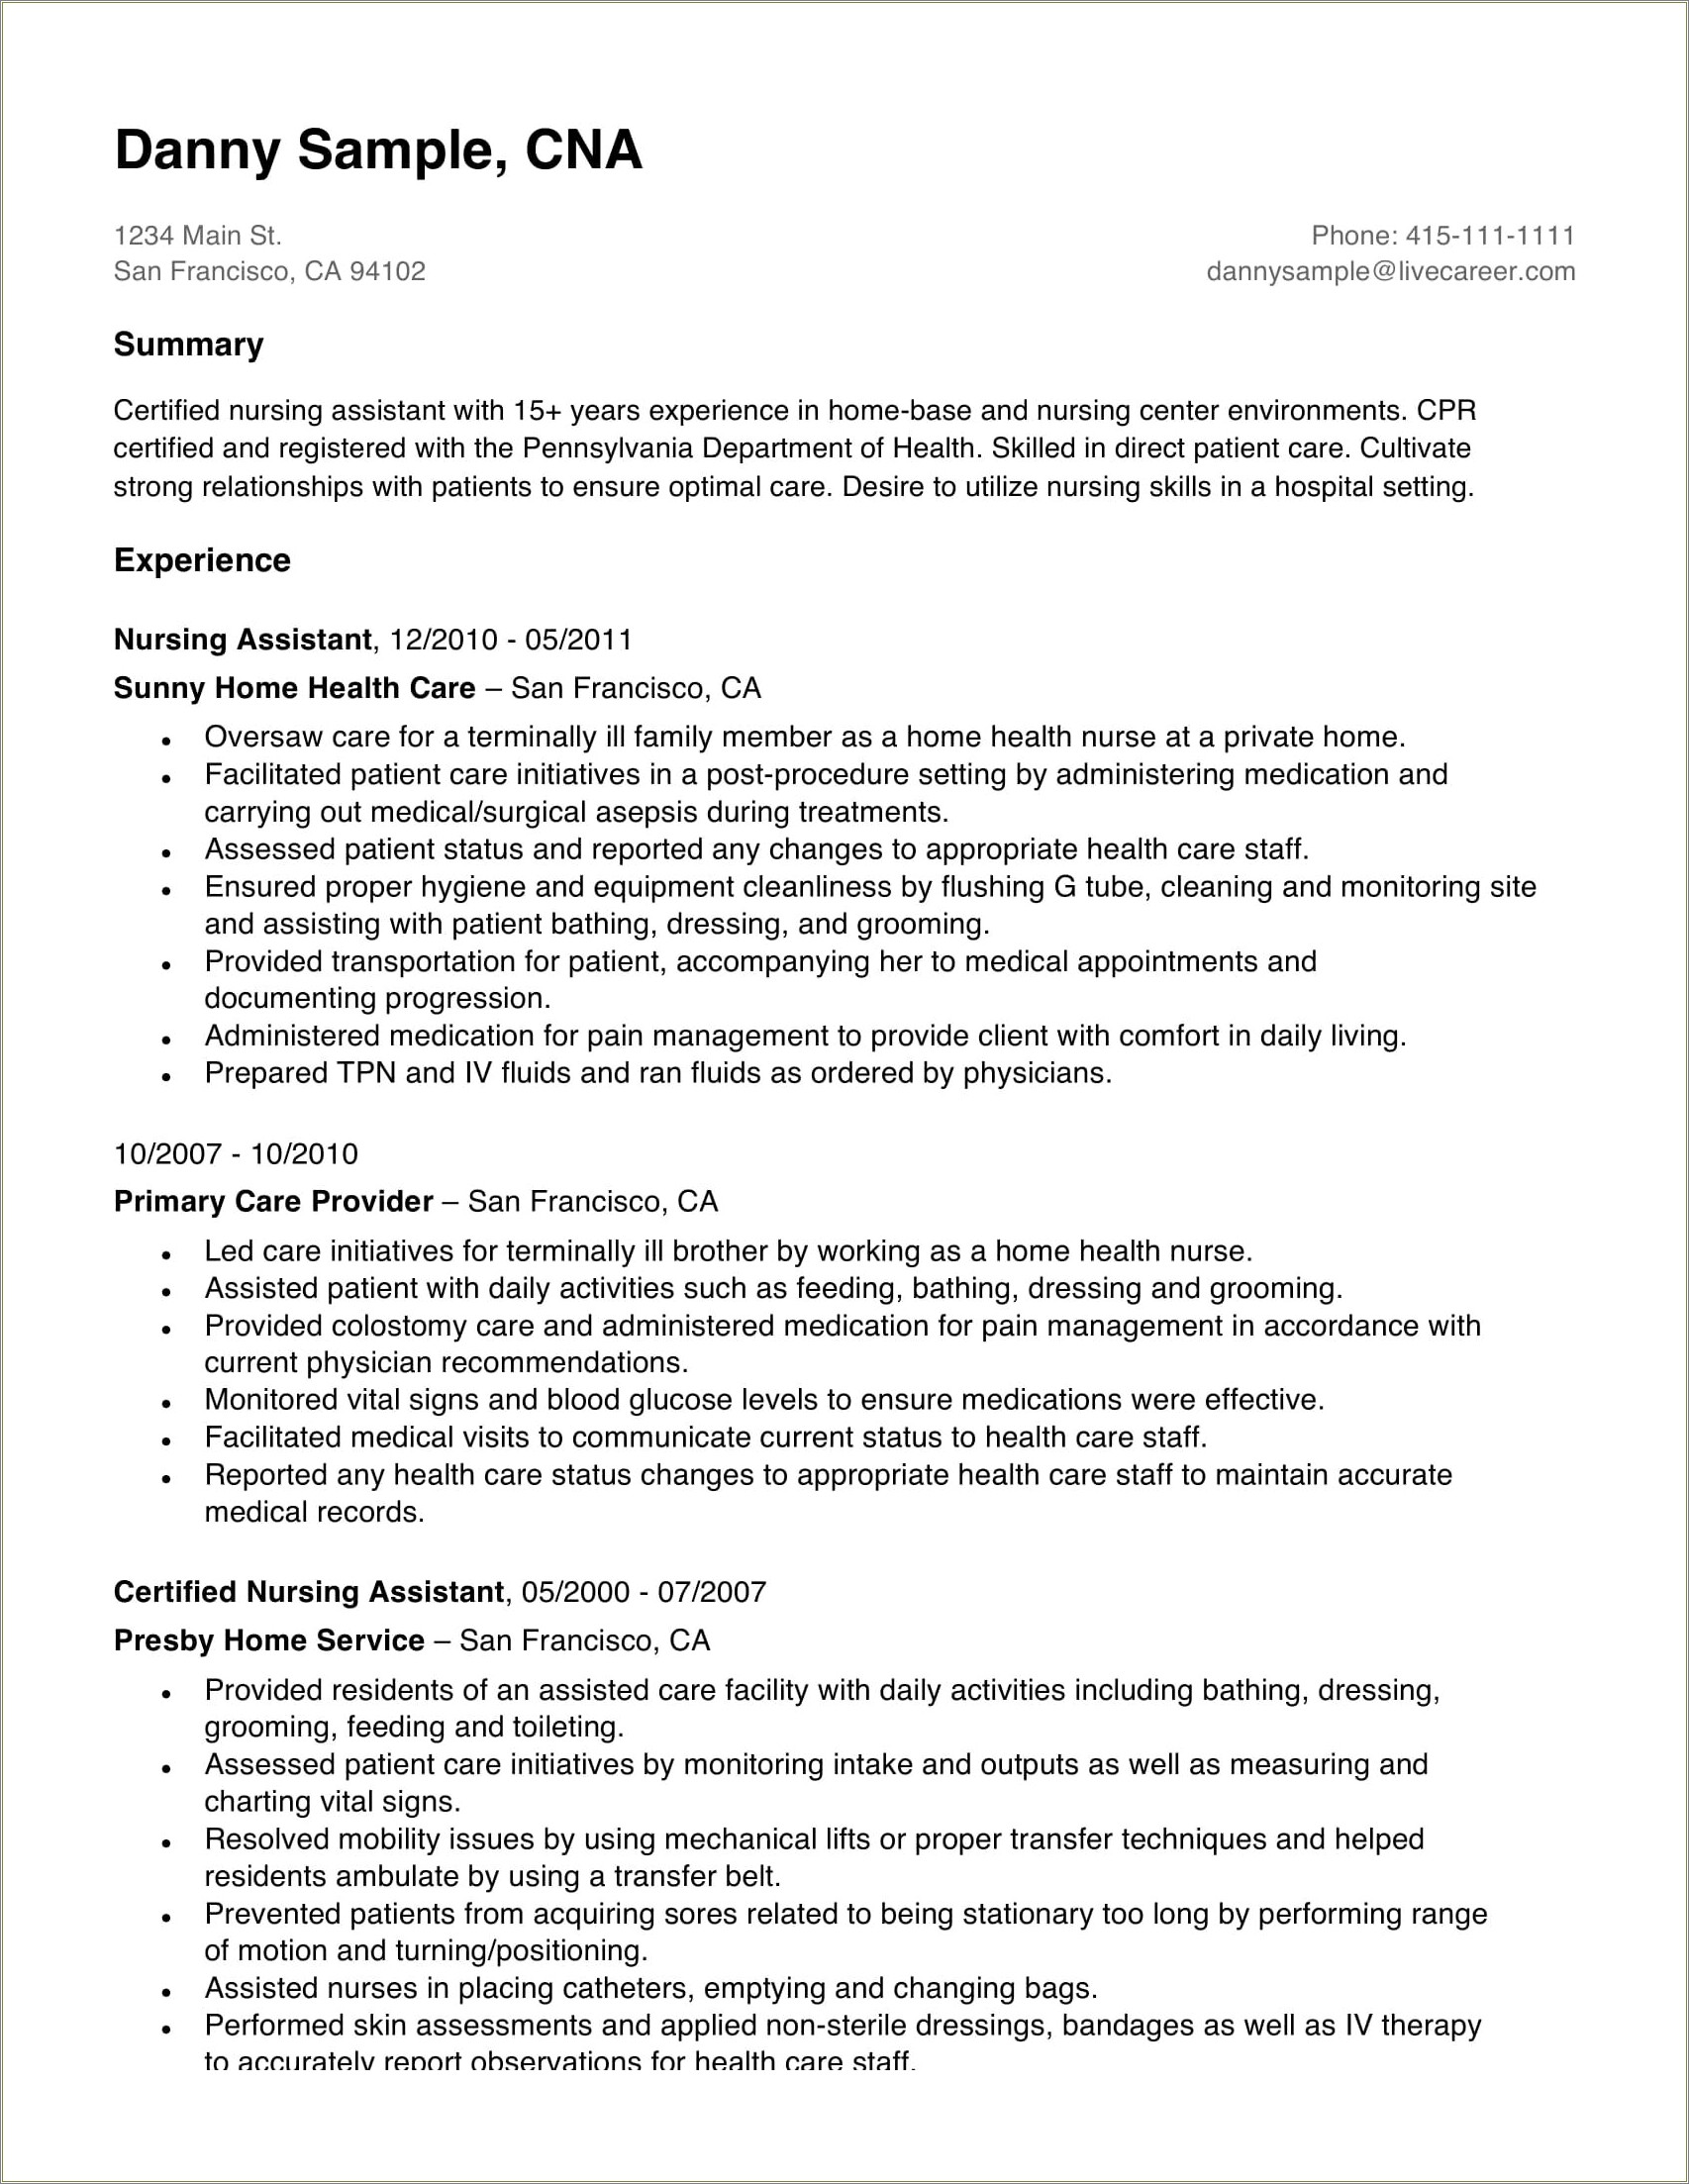 Example Of A Resume In Paragraph Form